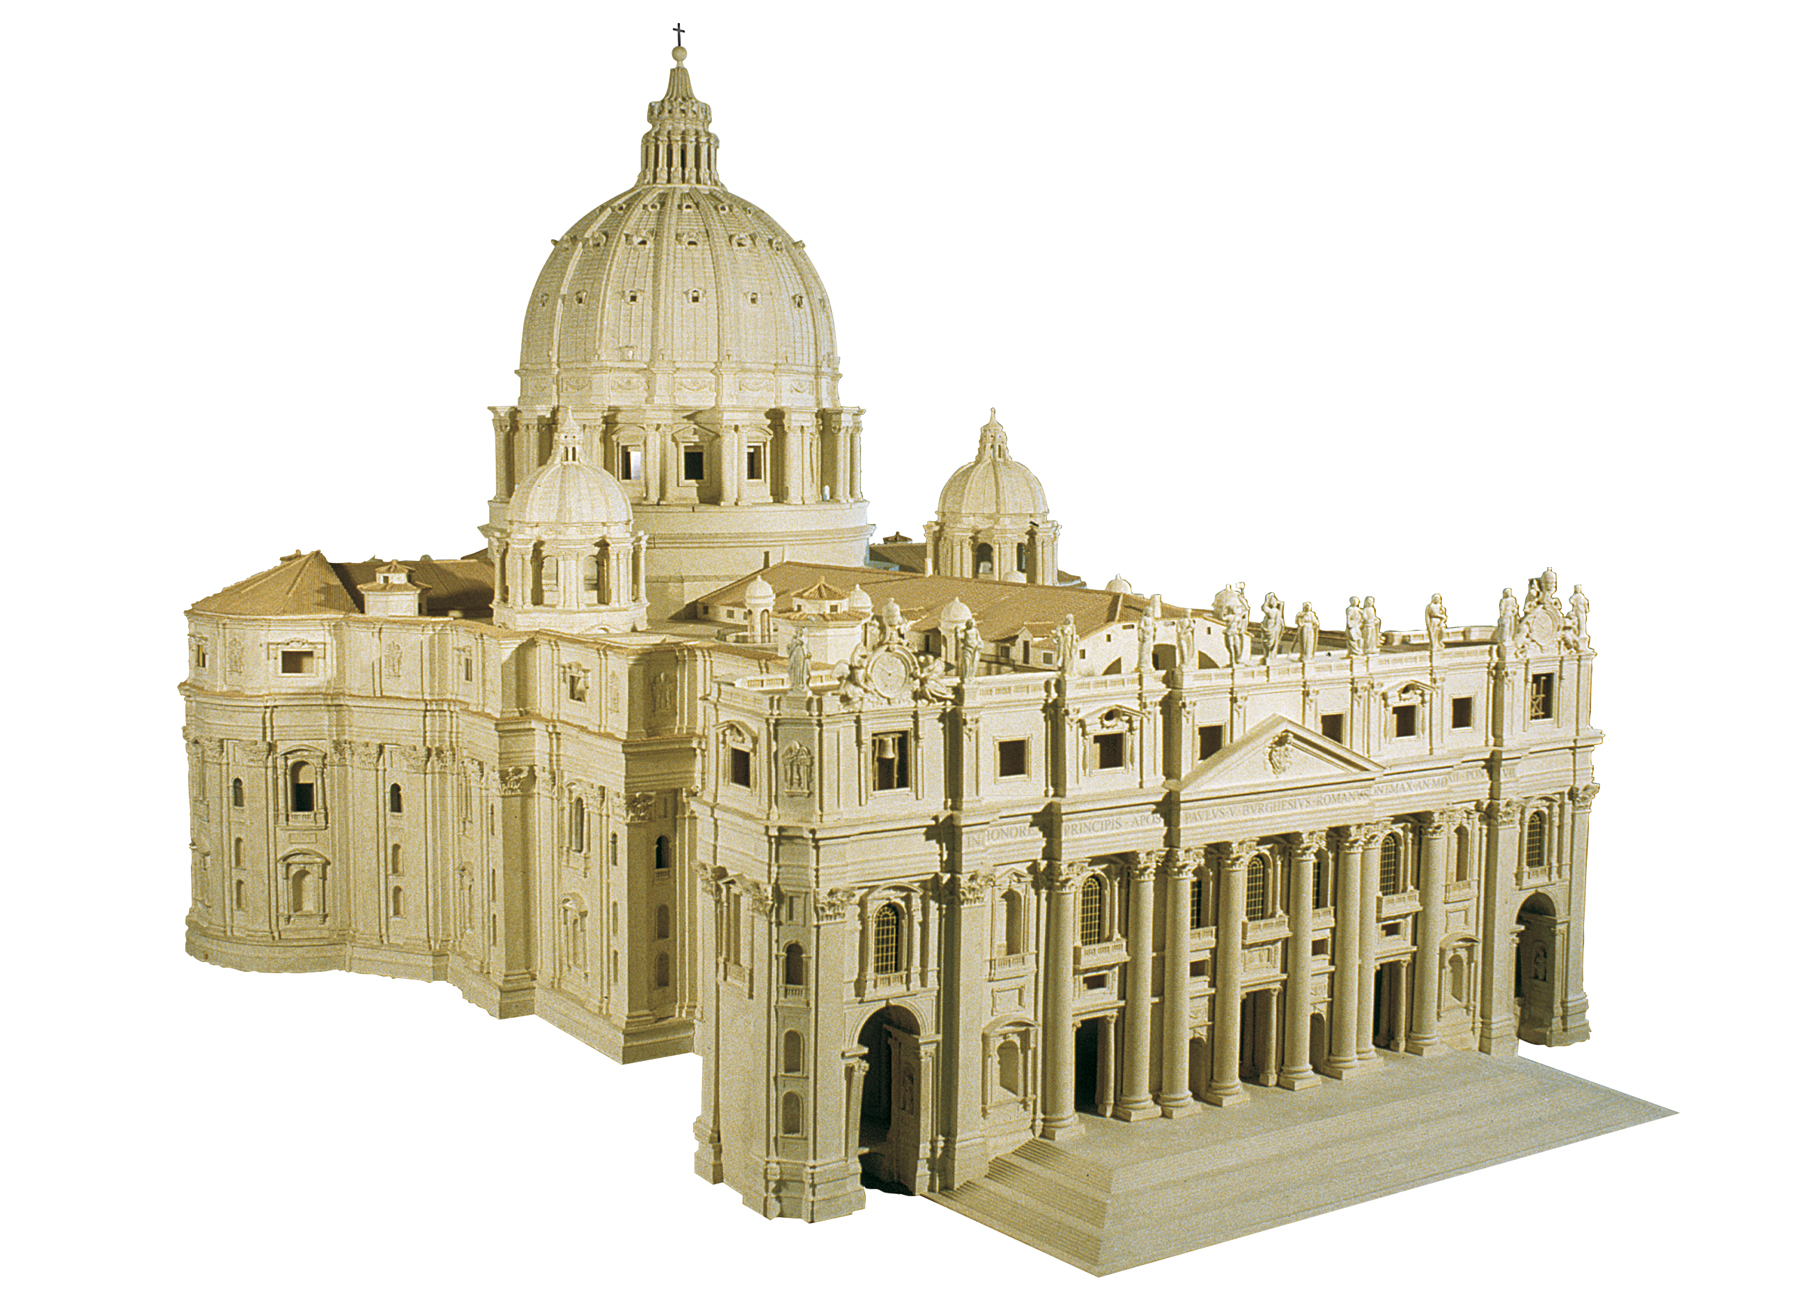 St. Peter’s Basilica (architectural model)